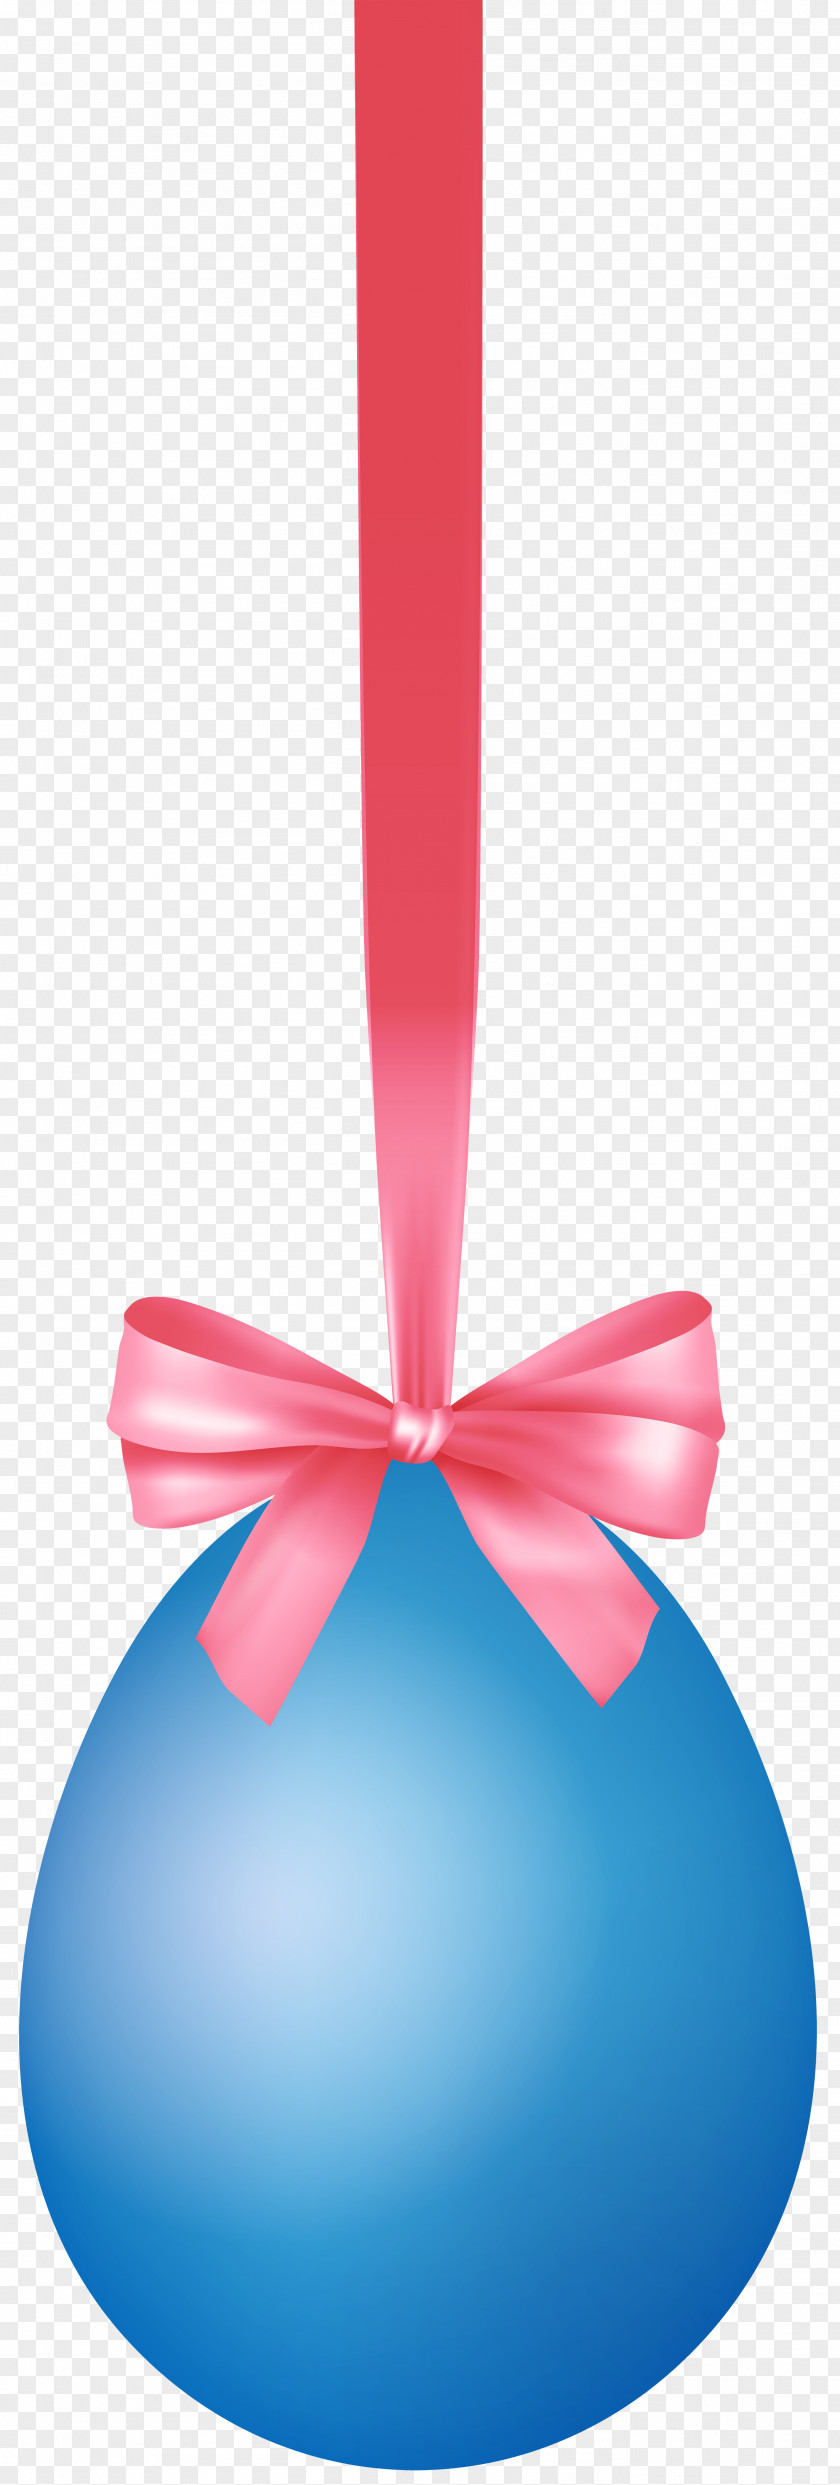 Blue Hanging Easter Egg With Bow Transparent Clip Art Image PNG